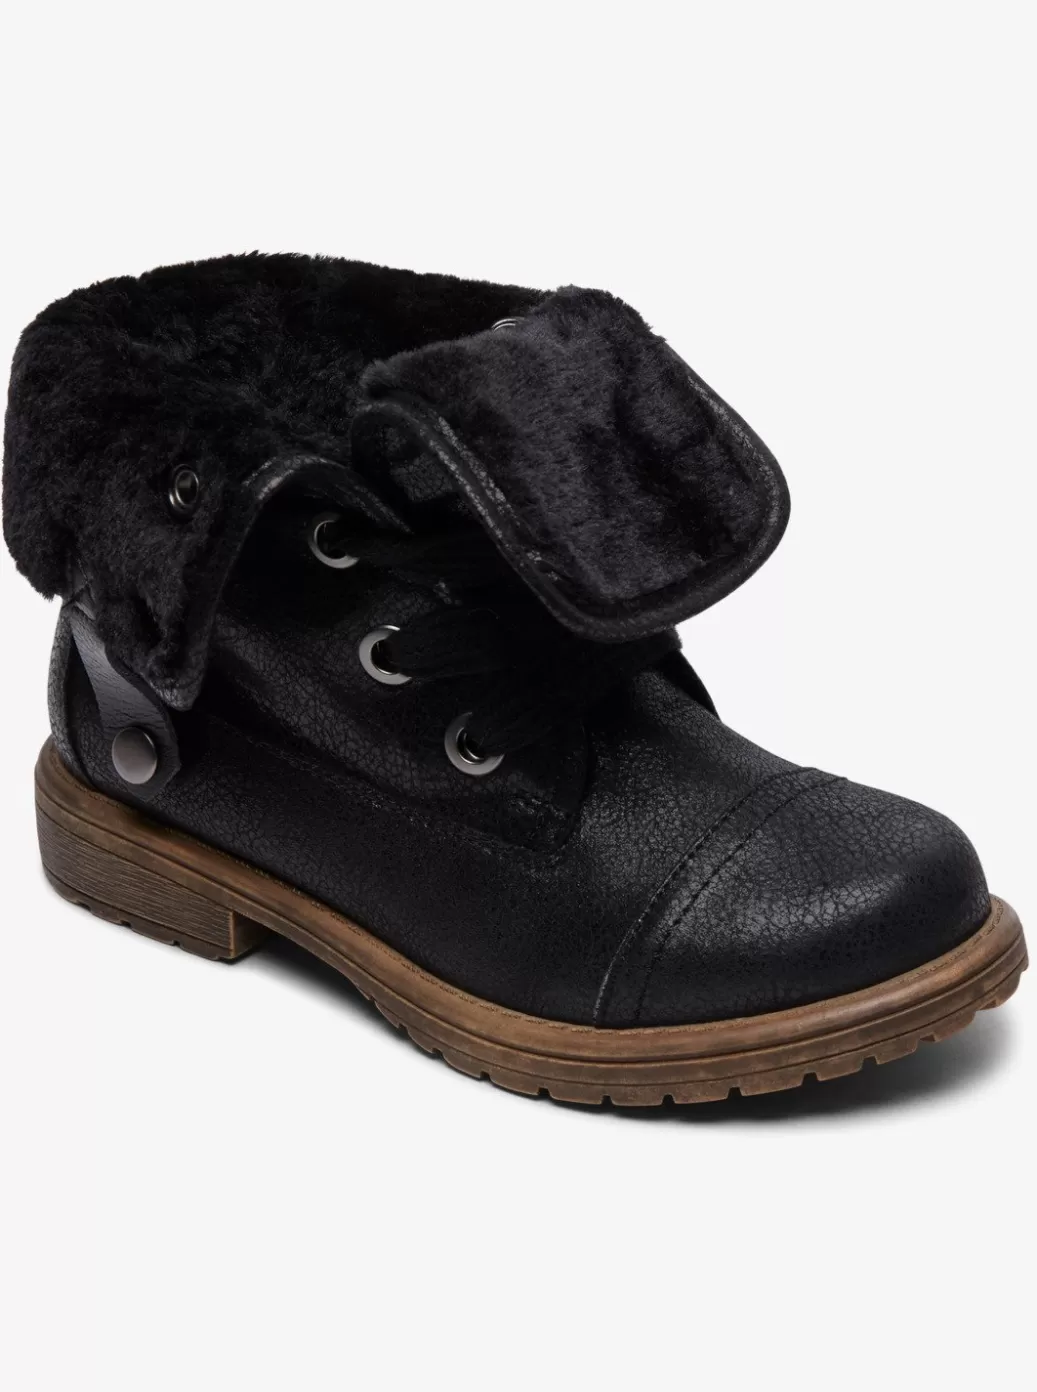 Shoes & Sandals | KIDS ROXY Girl's 4-16 Bruna Lace-Up Boots Black